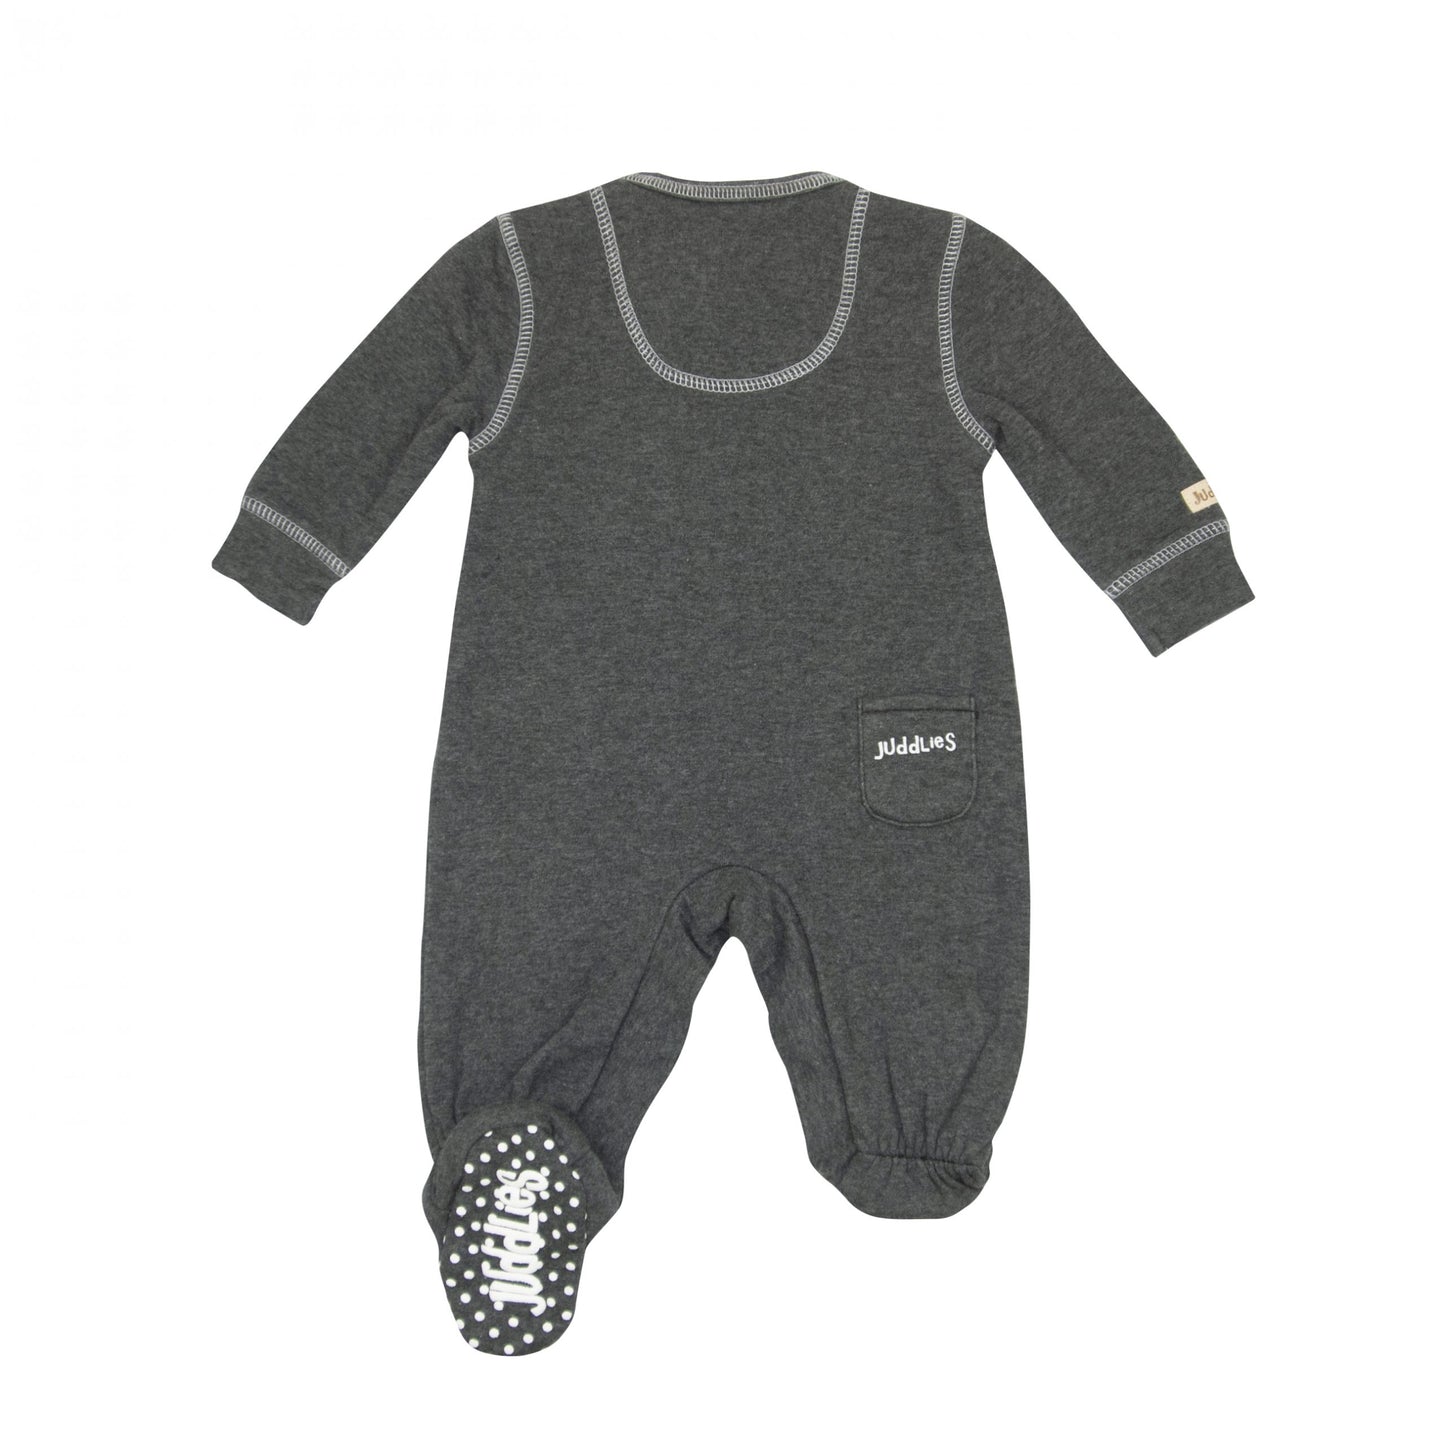 Breathe EZE Collection | Baby Footed Two-Way Zipper Sleeper: Charcoal Grey Fleck